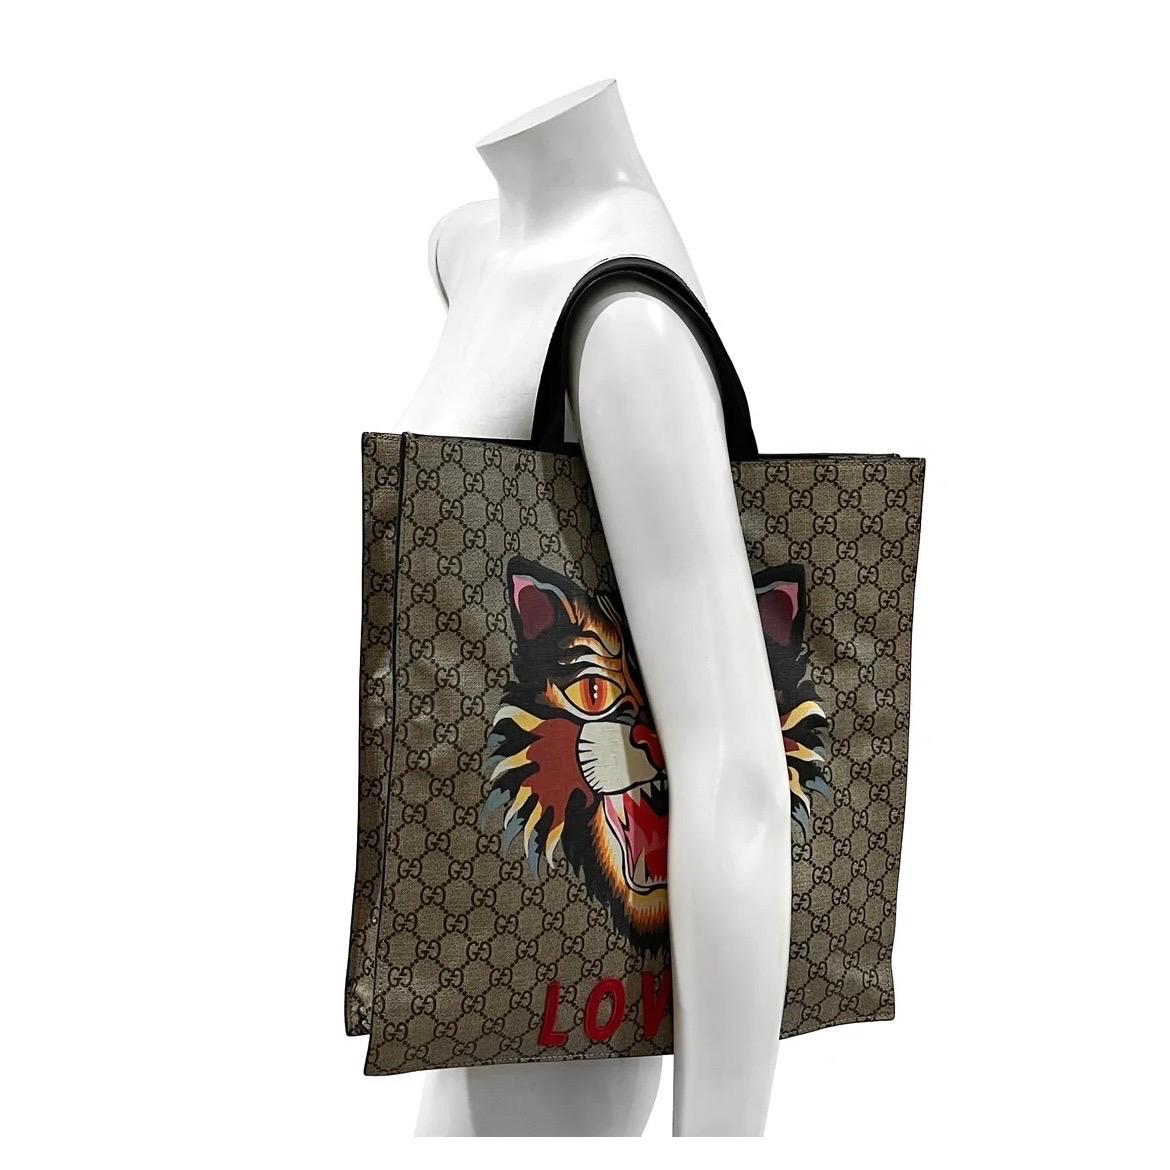 Angry Cat Gucci - 3 For Sale on 1stDibs